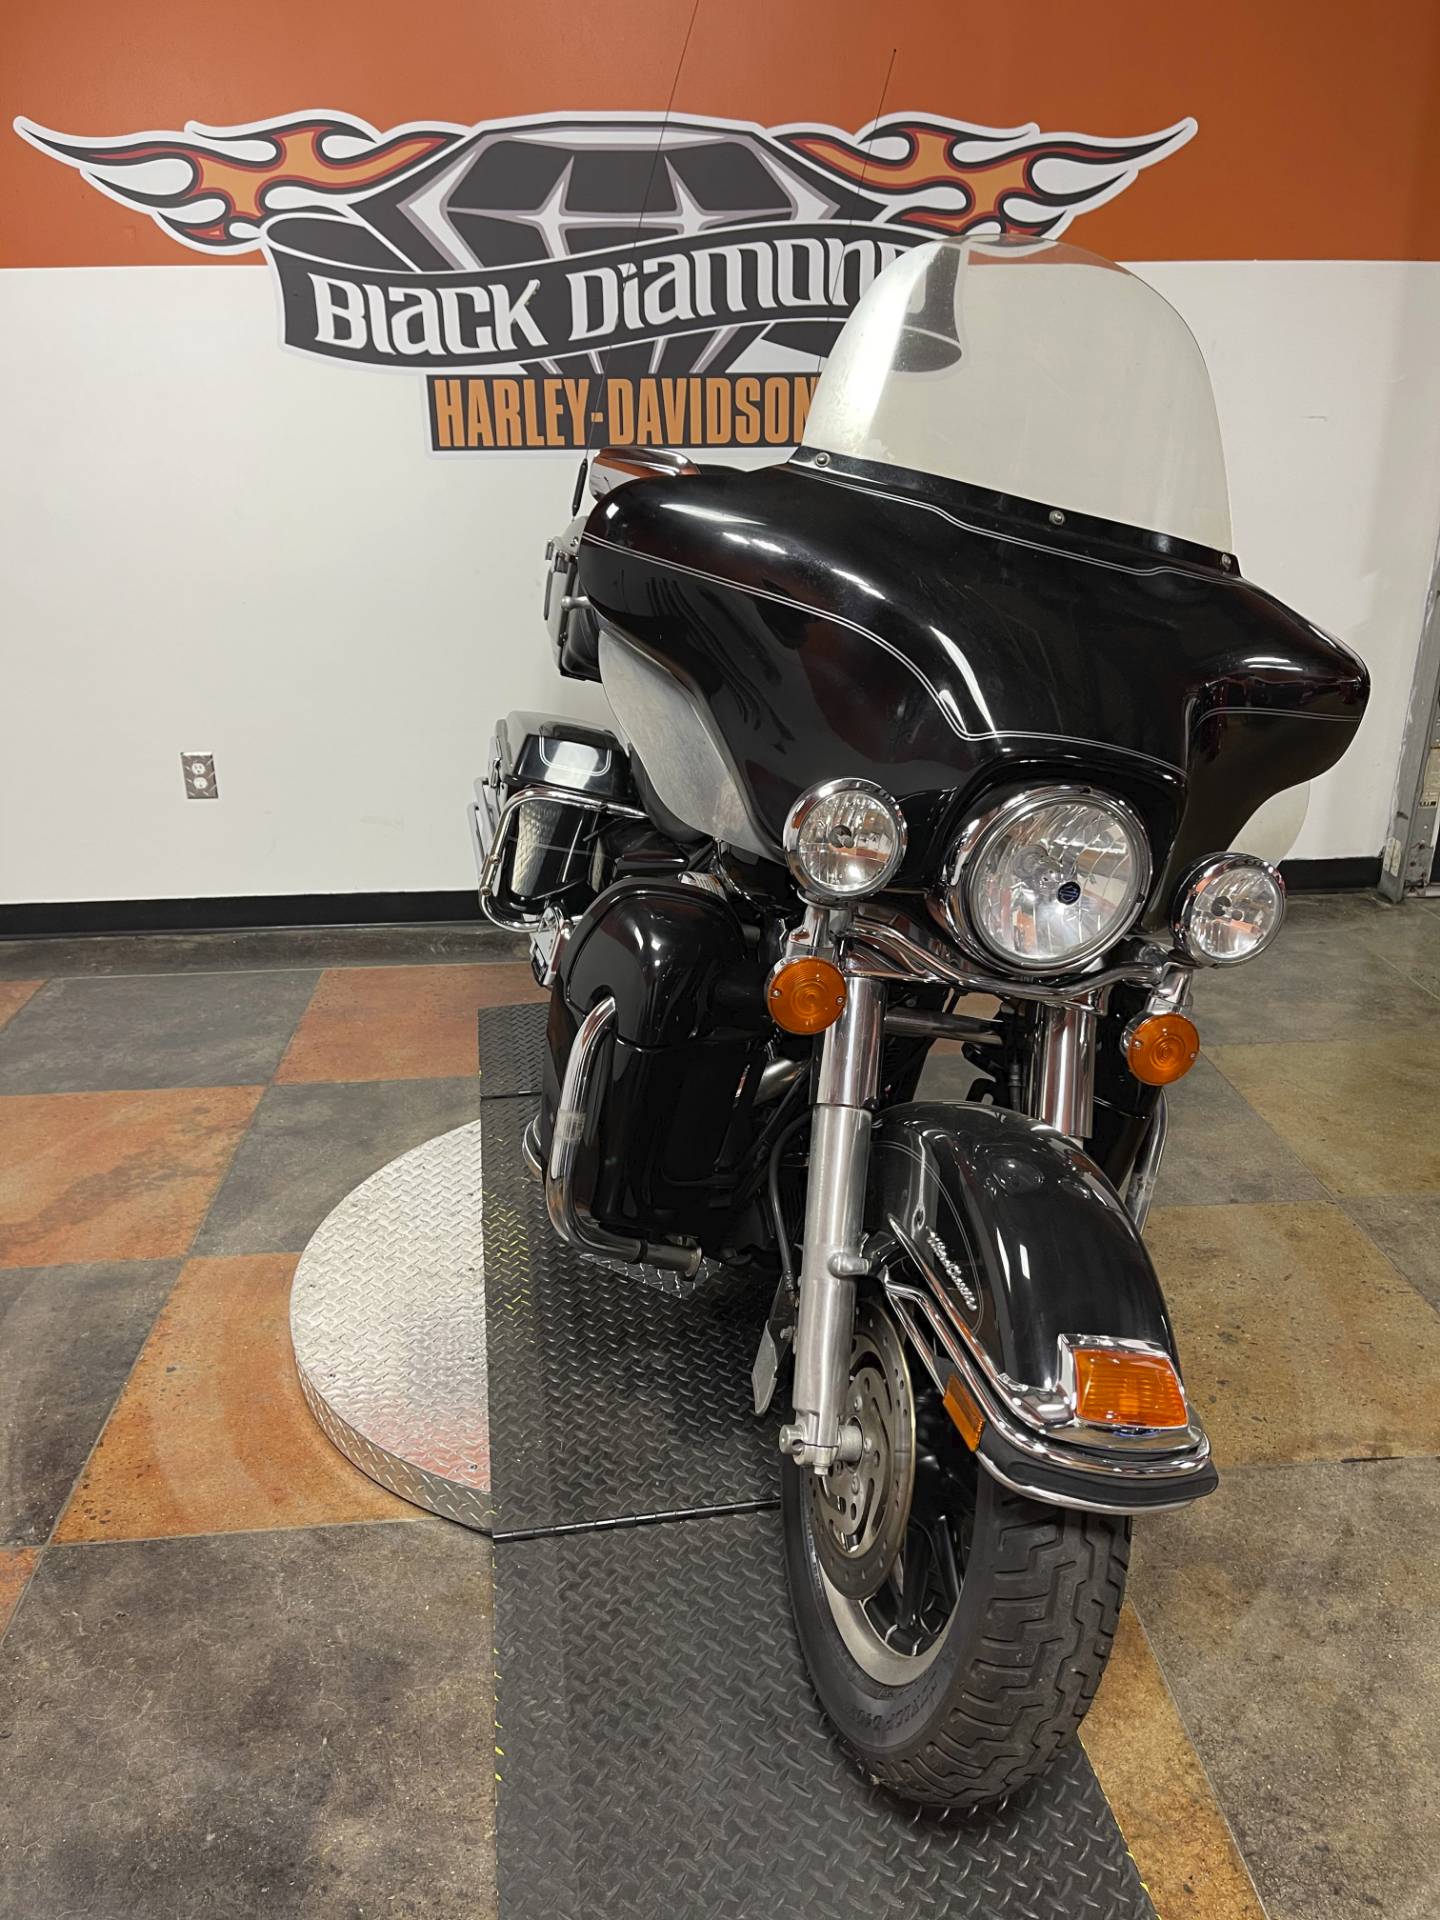 Used 2007 Harley Davidson Ultra Classic Electra Glide Deep Cobalt Pearl Motorcycles In Marion Il U667275